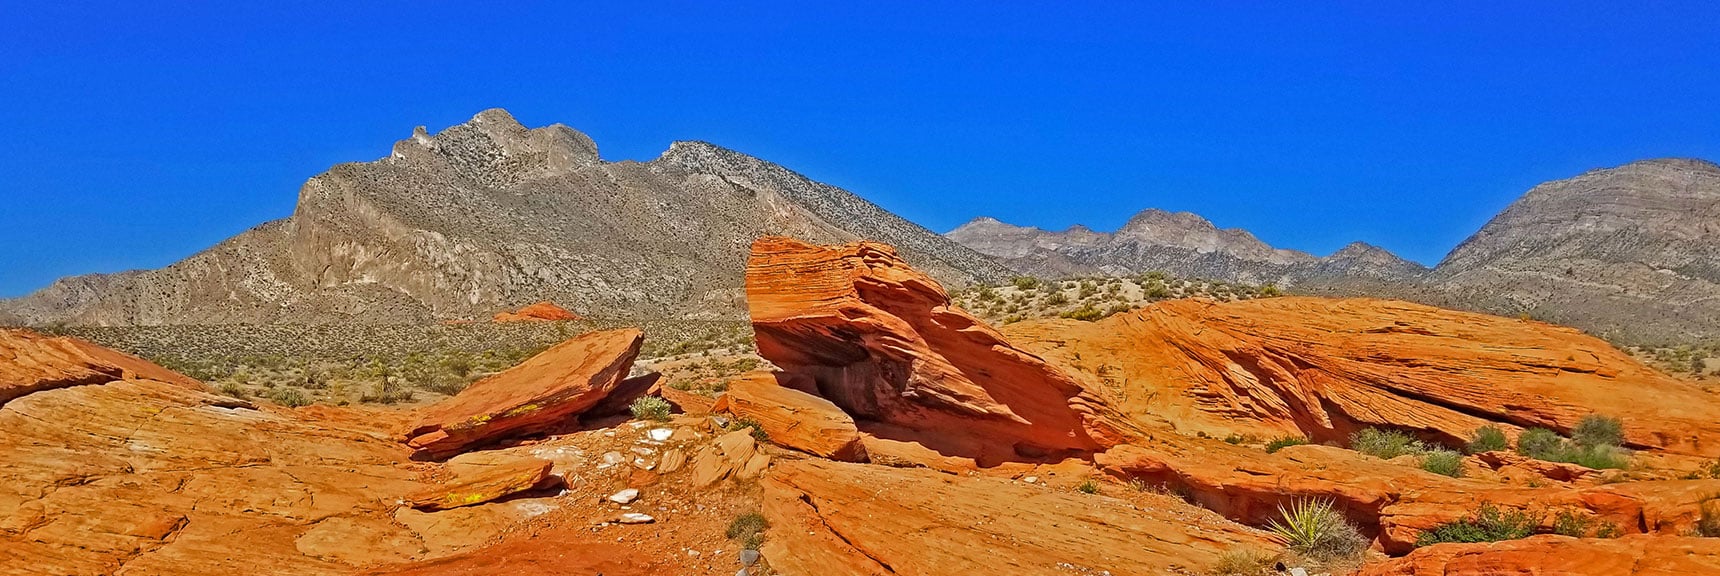 Countless Artistic Red Rock Formations | Little Red Rock Las Vegas, Nevada, Near La Madre Mountains Wilderness